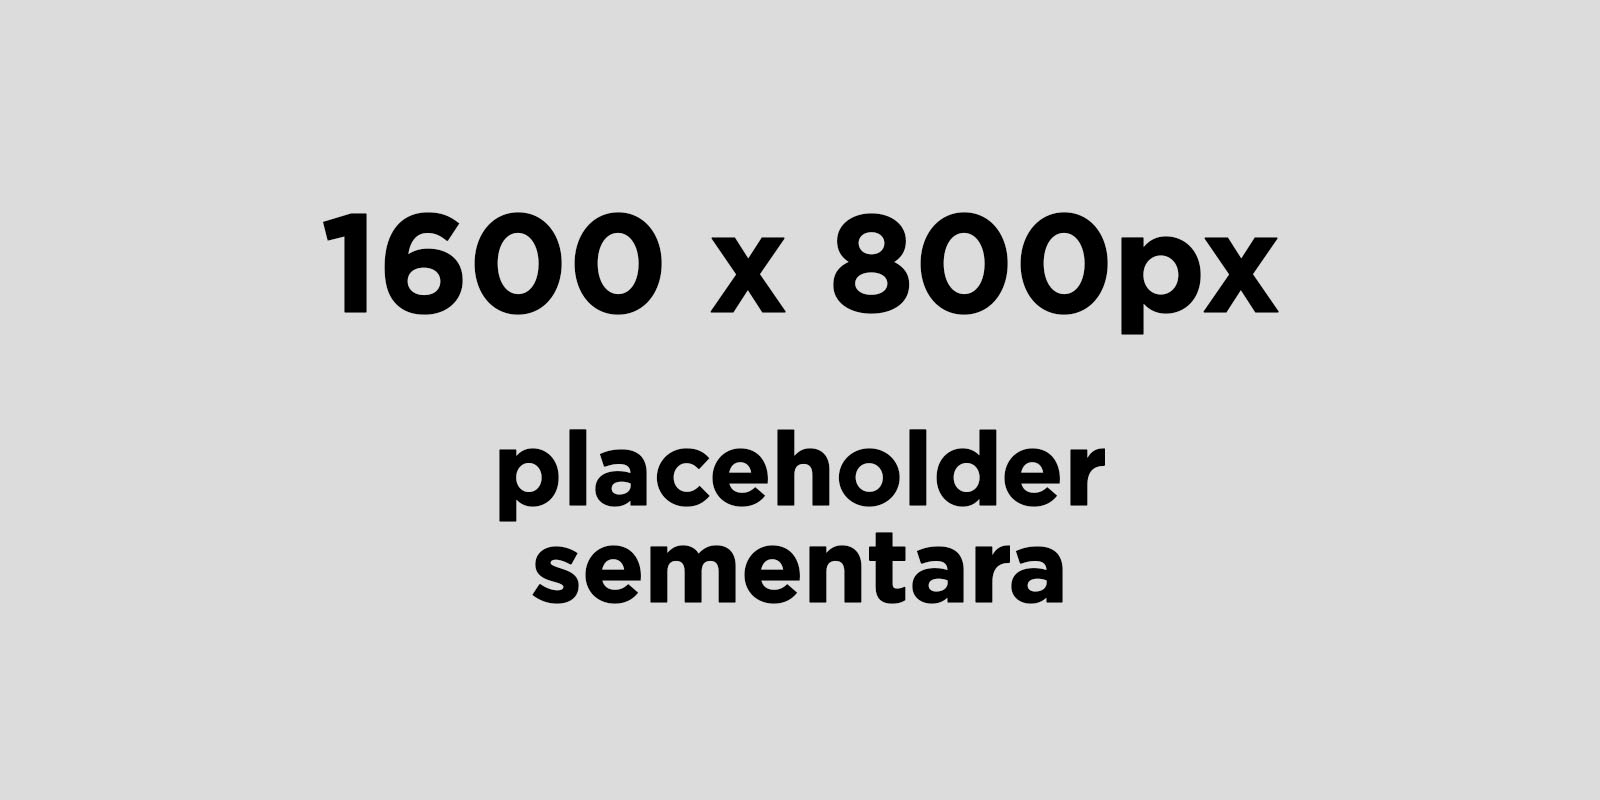 placeholder-1600x800px